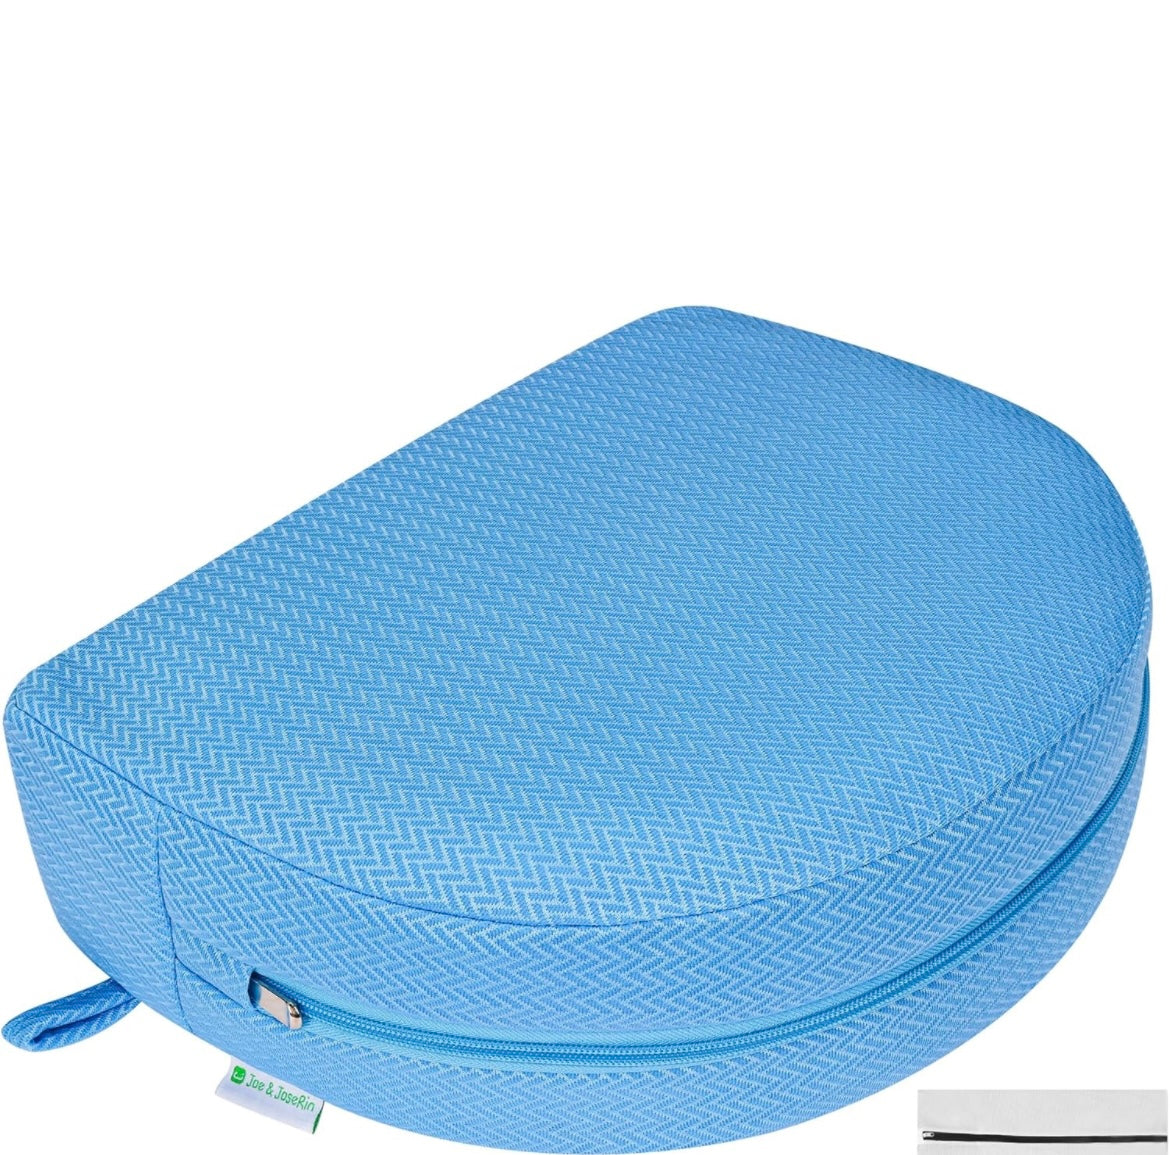 Hot Tub Booster Seat with Non-Slip Micro Dot Bottom, Weighted Spa Booster Seat Cushion with 3D Air Mesh Cover for Adults and Kids, Quick Drying Hot Tub Accessories for Indoor or Outdoor